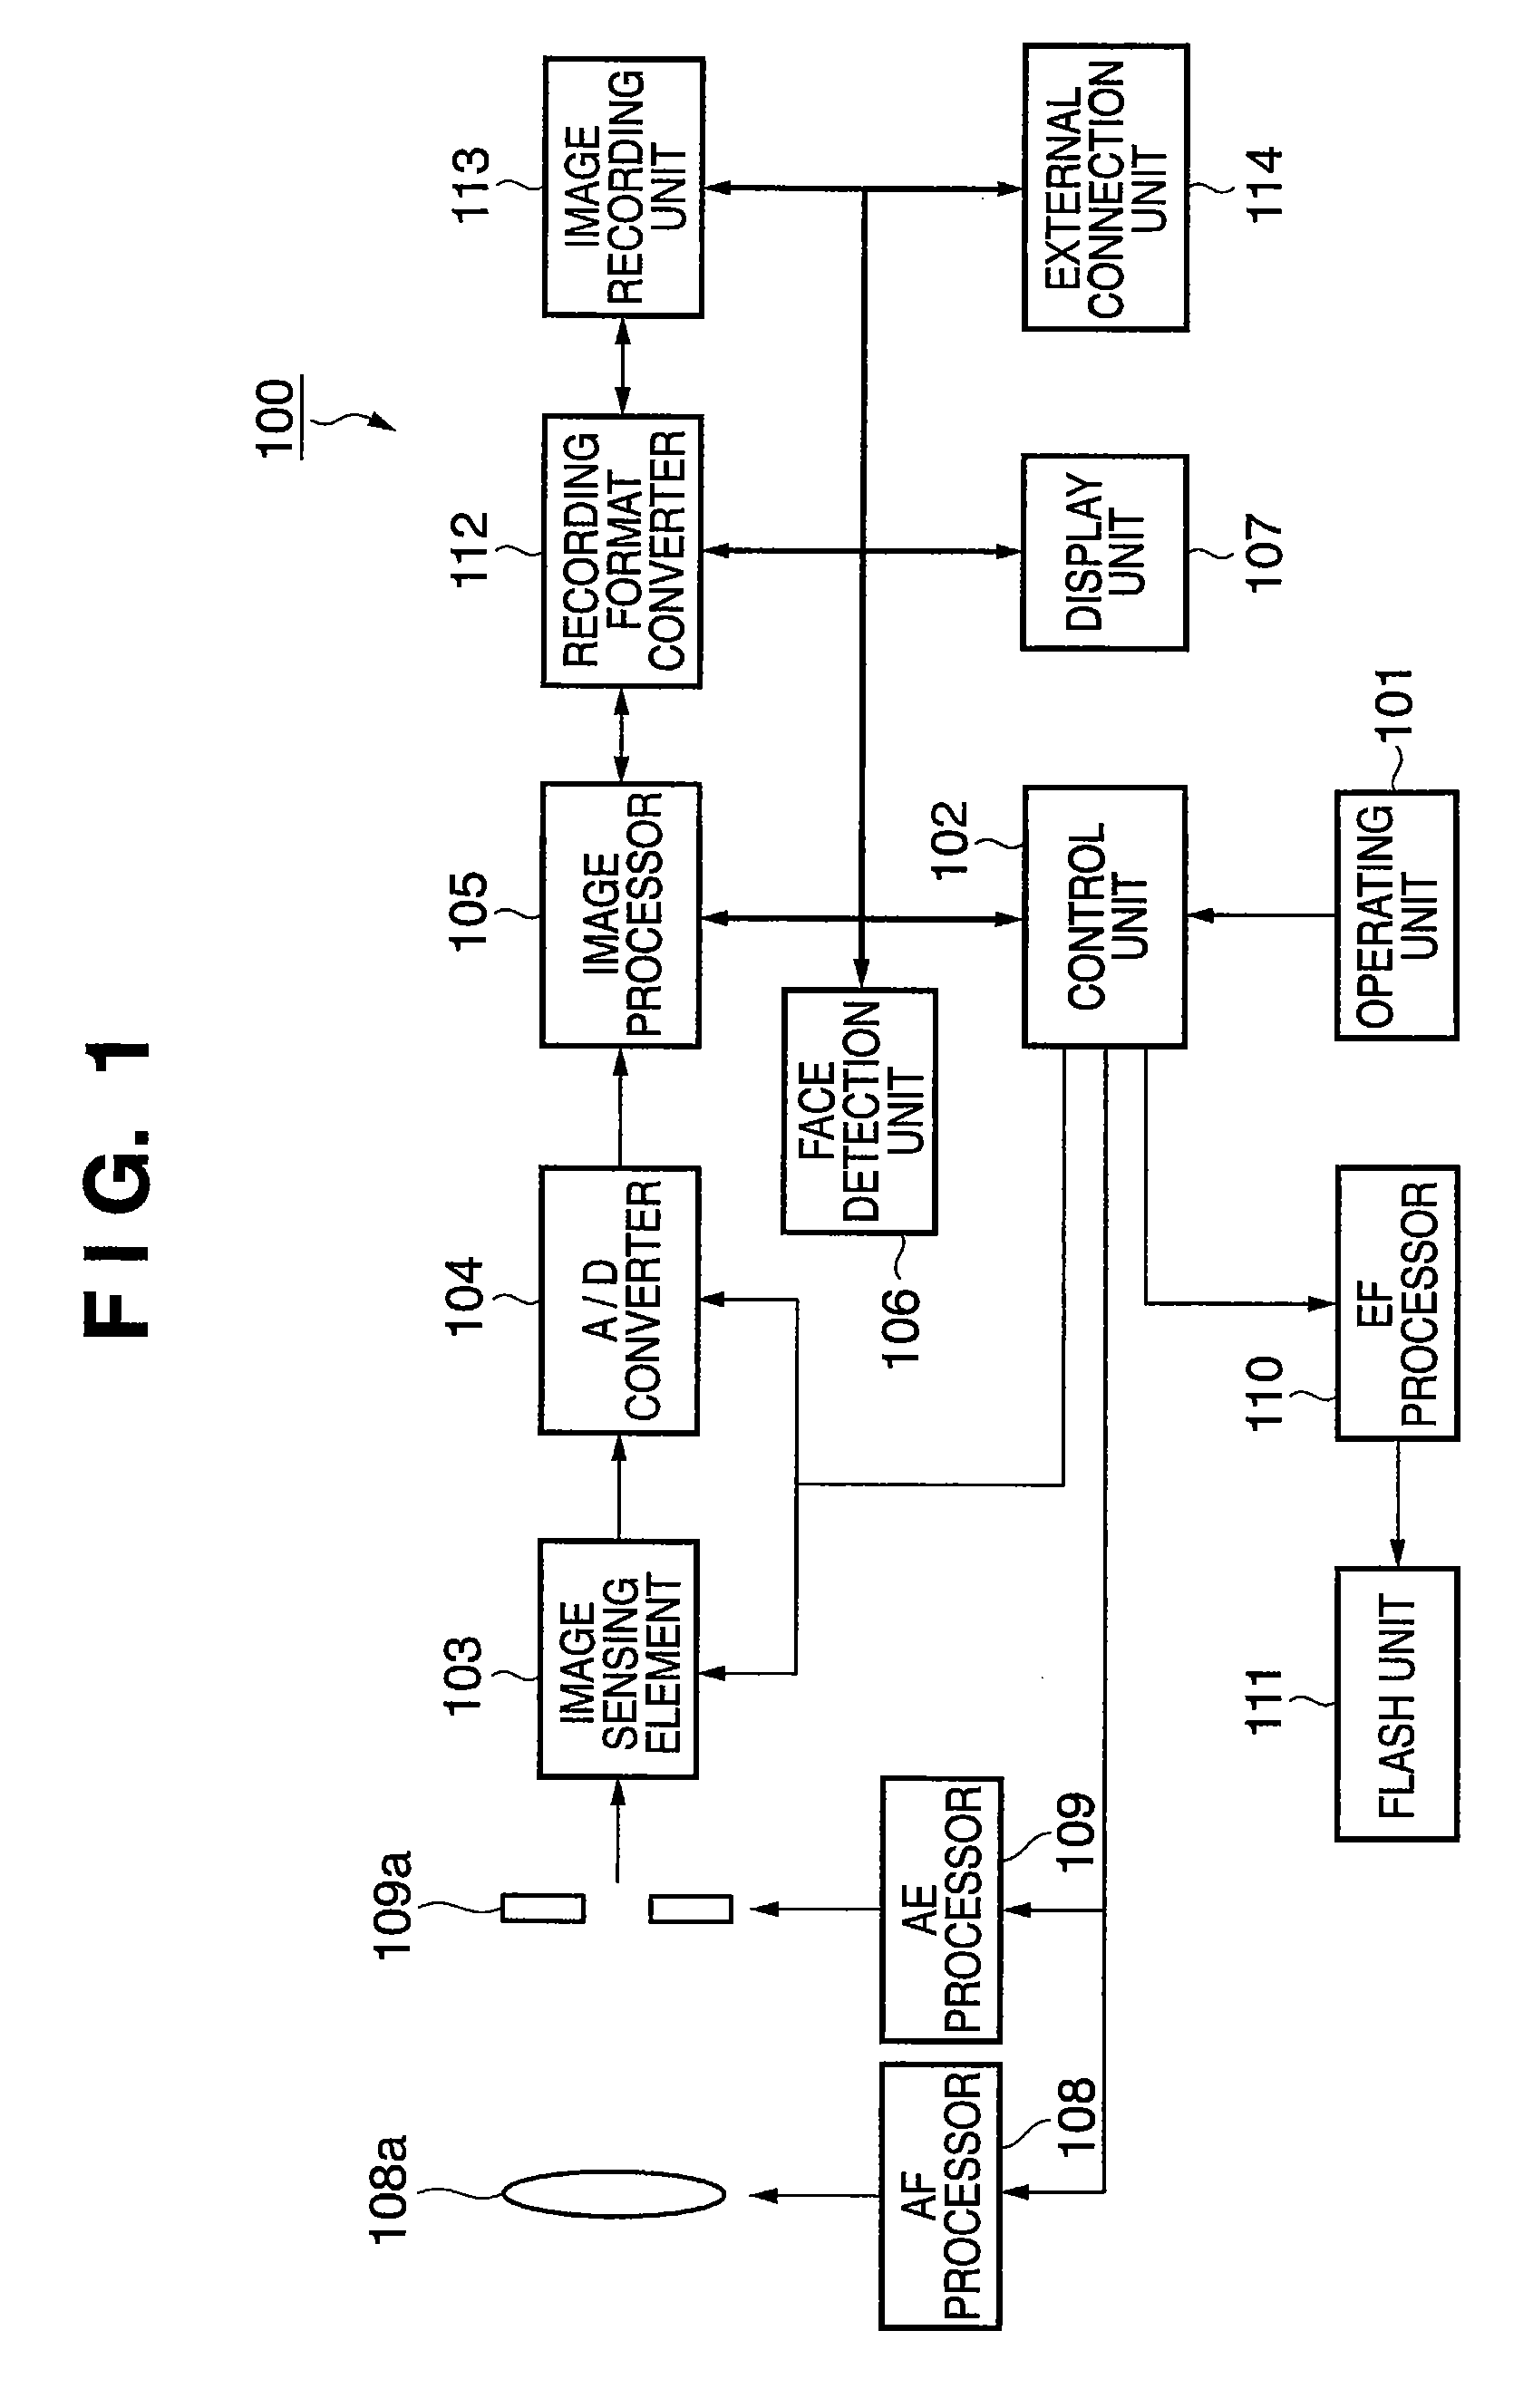 Image sensing apparatus having exposure control and method therefor